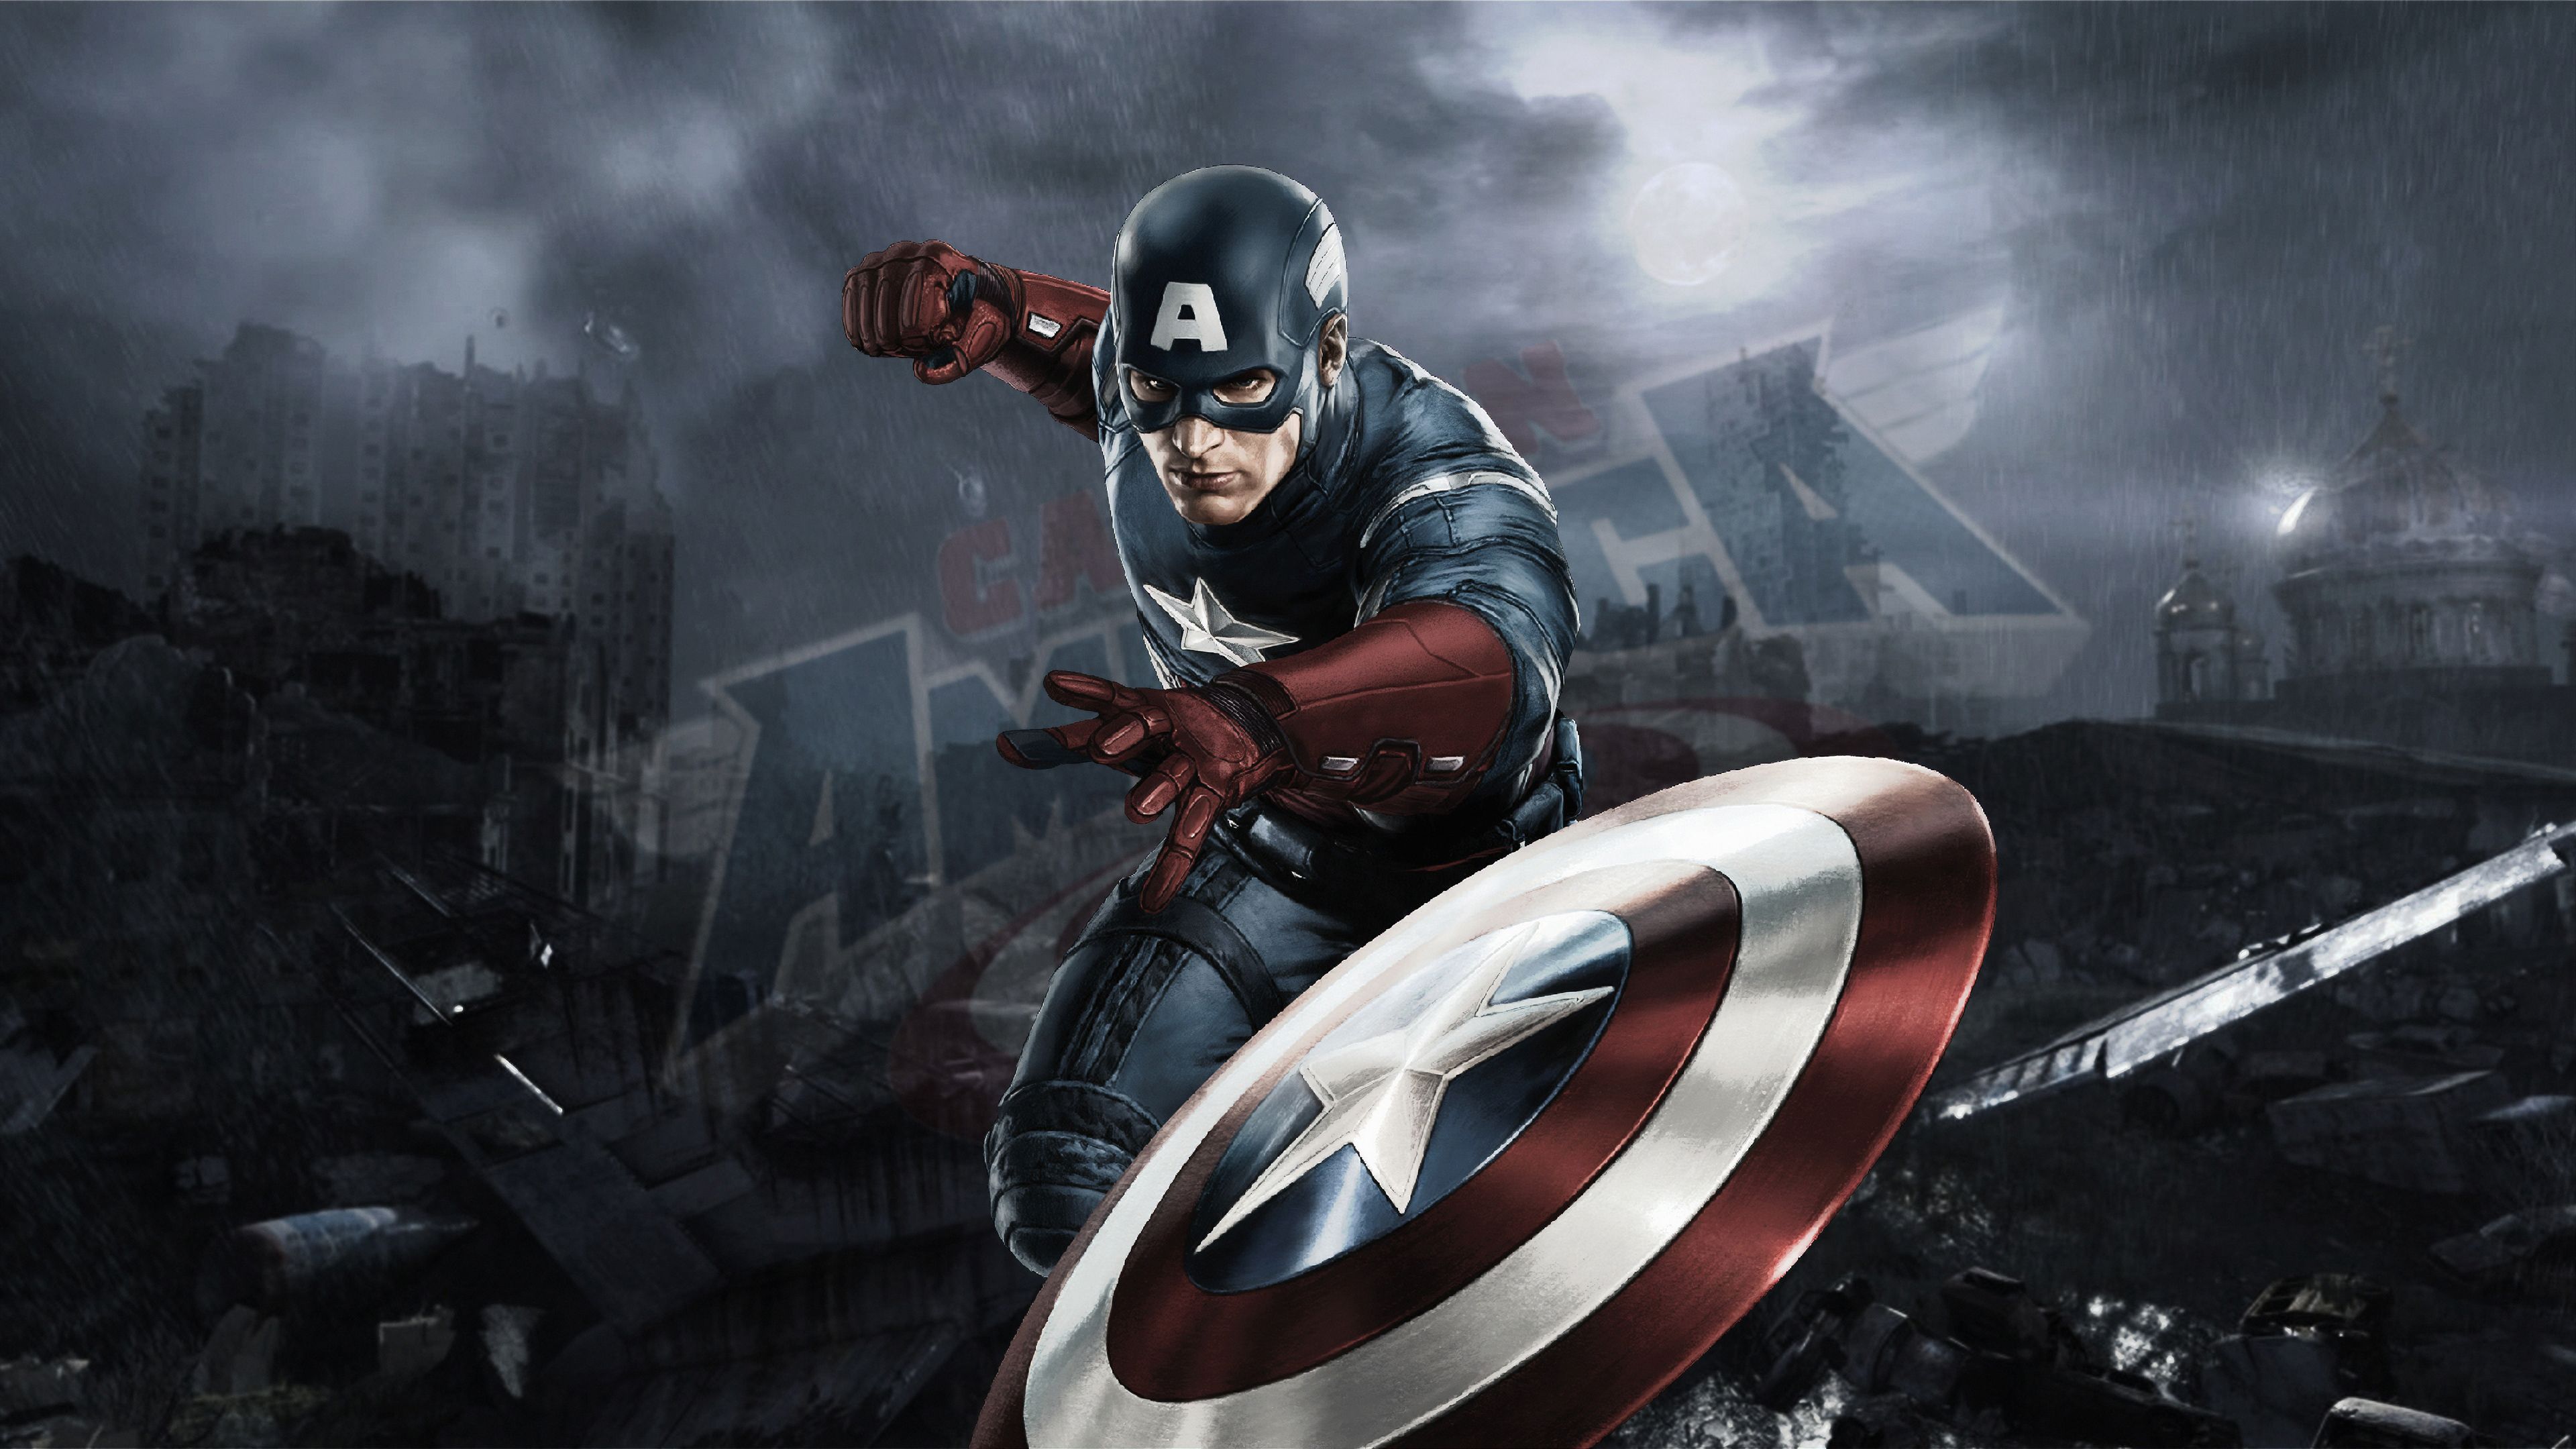 Captain America 4k Artworks Laptop Full HD 1080P HD 4k Wallpaper, Image, Background, Photo and Picture